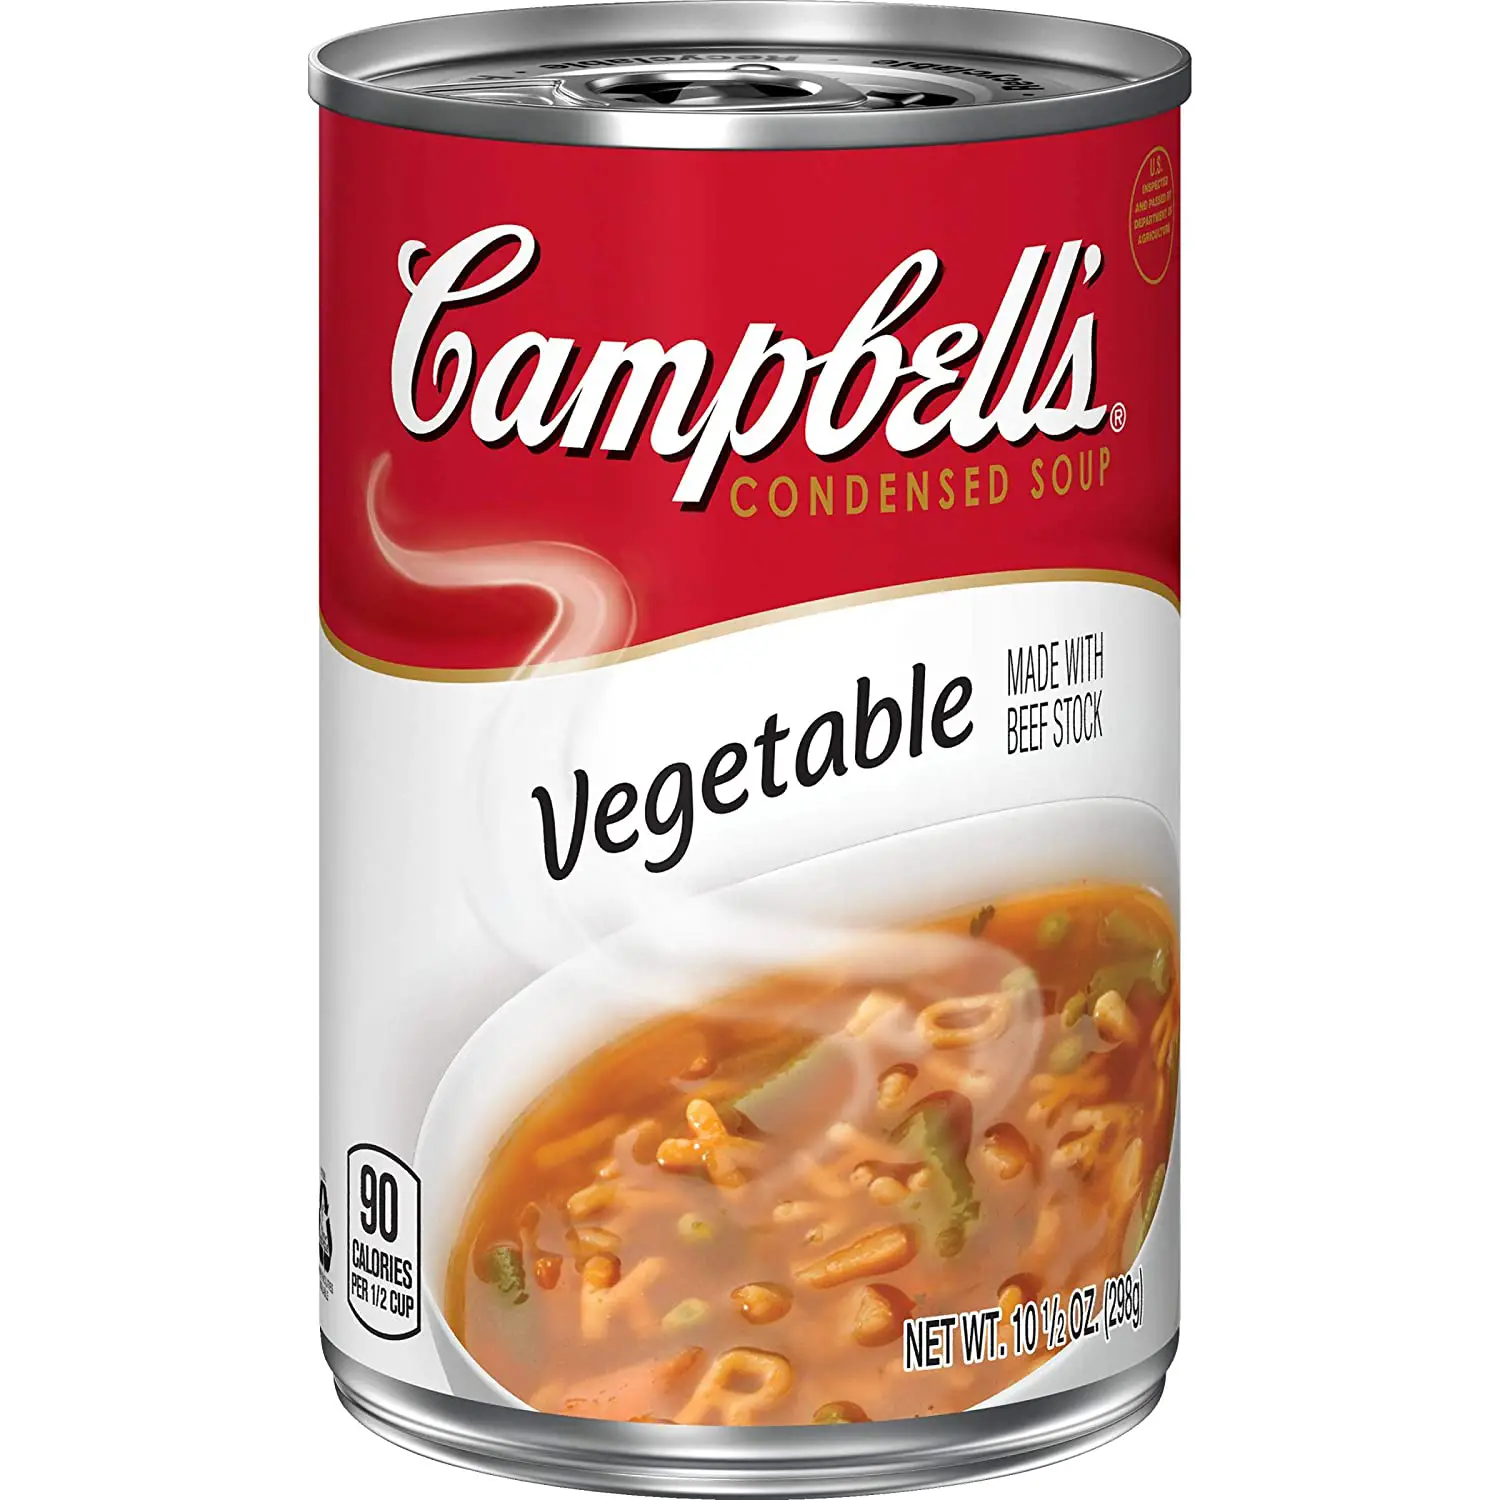 Amazon.com : Campbells Condensed Vegetable Soup with Beef Stock